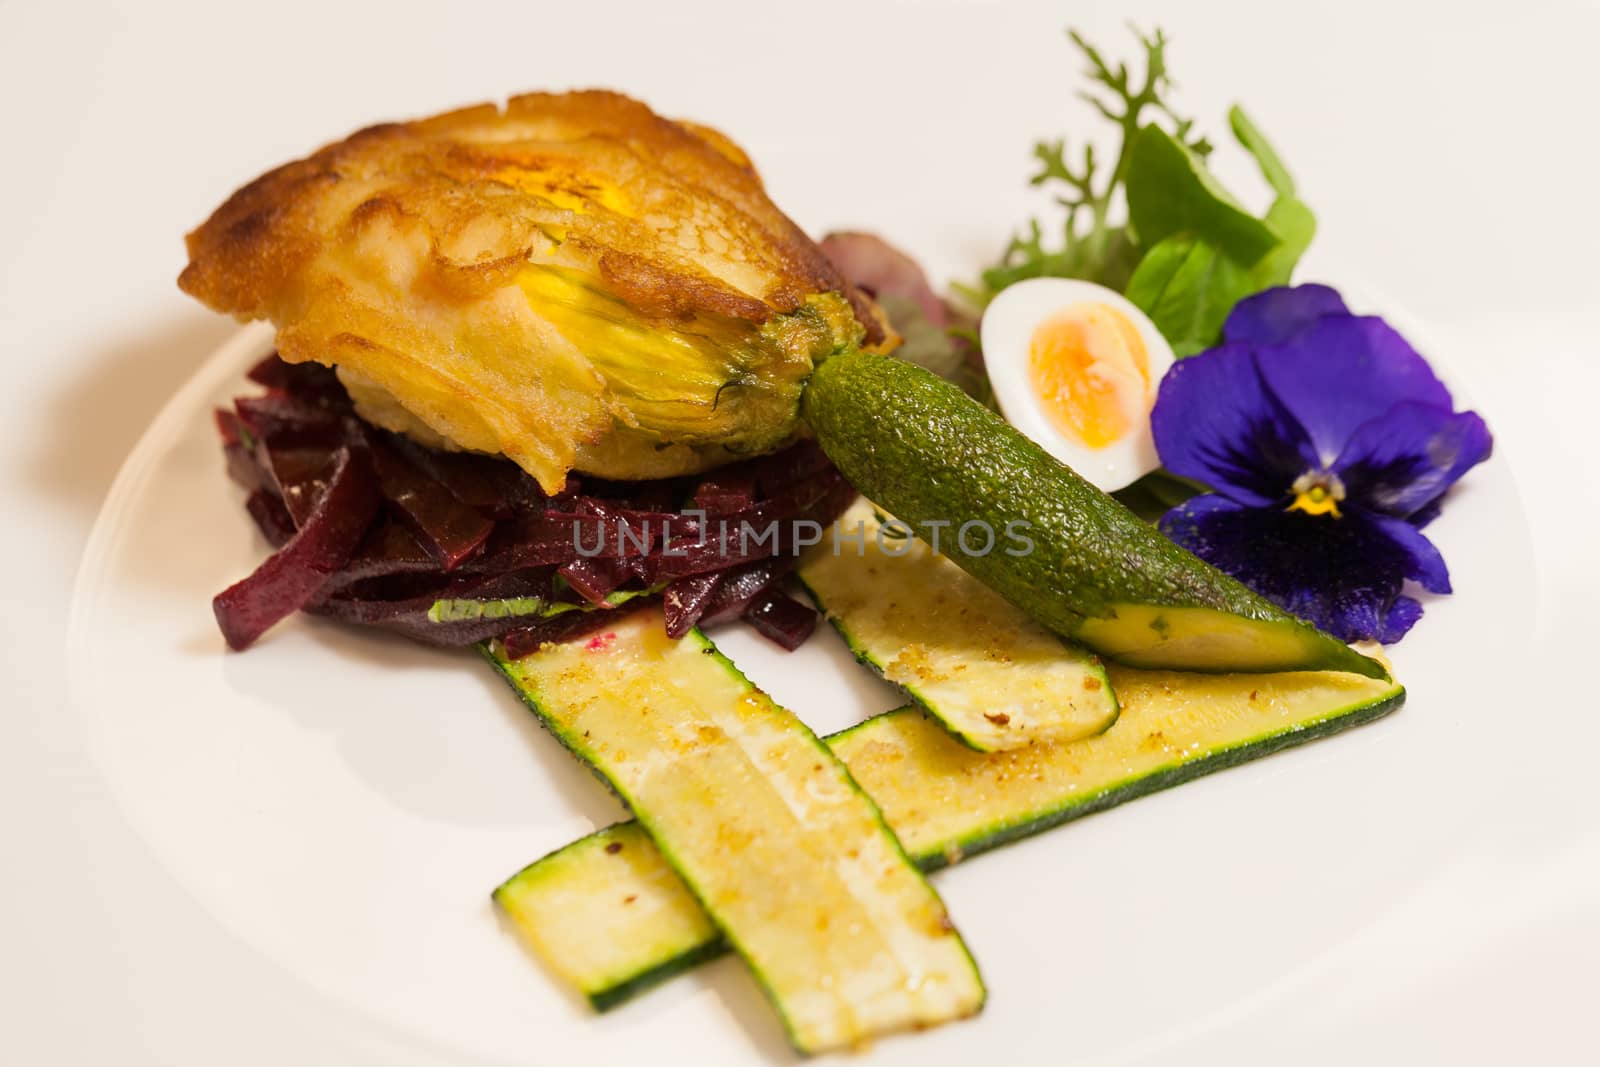 Delicious biscuit with beets, zucchini and pansy by juniart